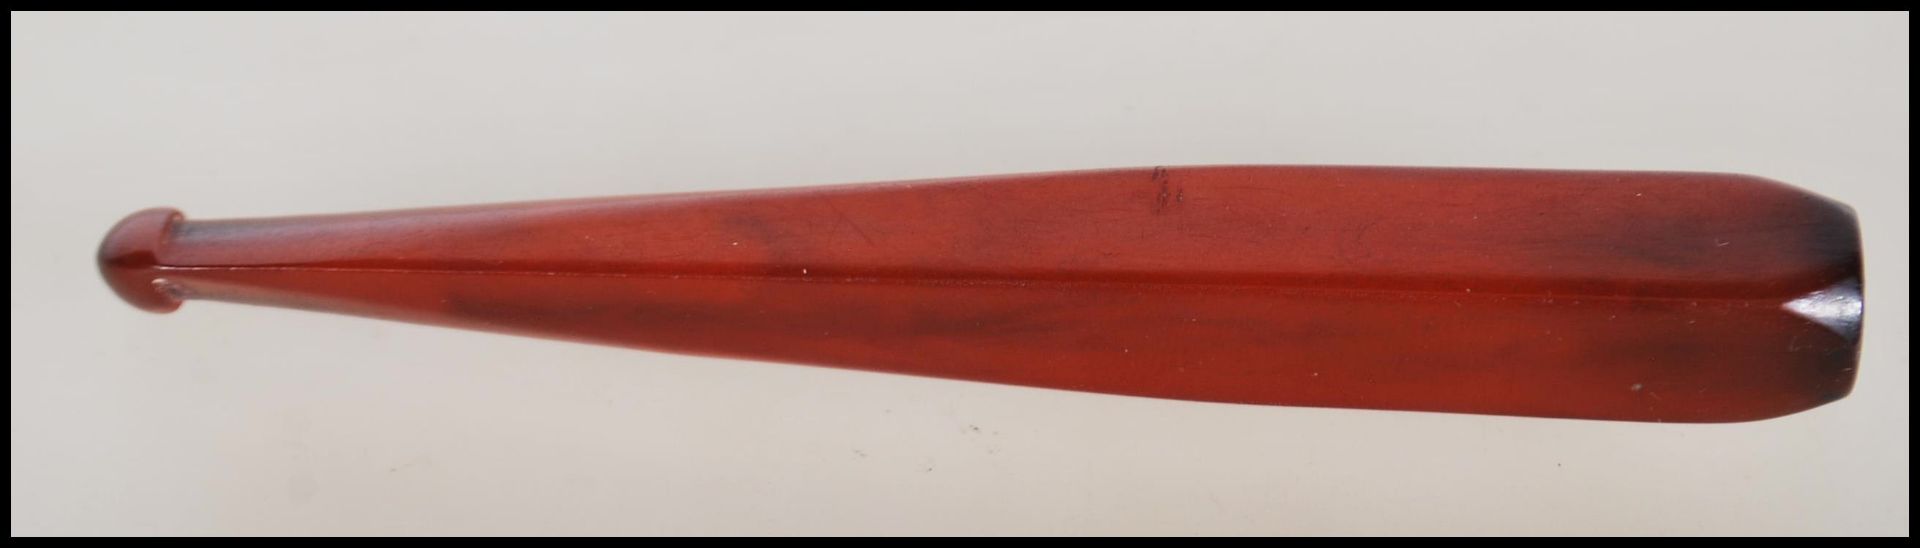 A vintage early 20th Century Art Deco bakelite cigarette cheroot holder being red in colour.